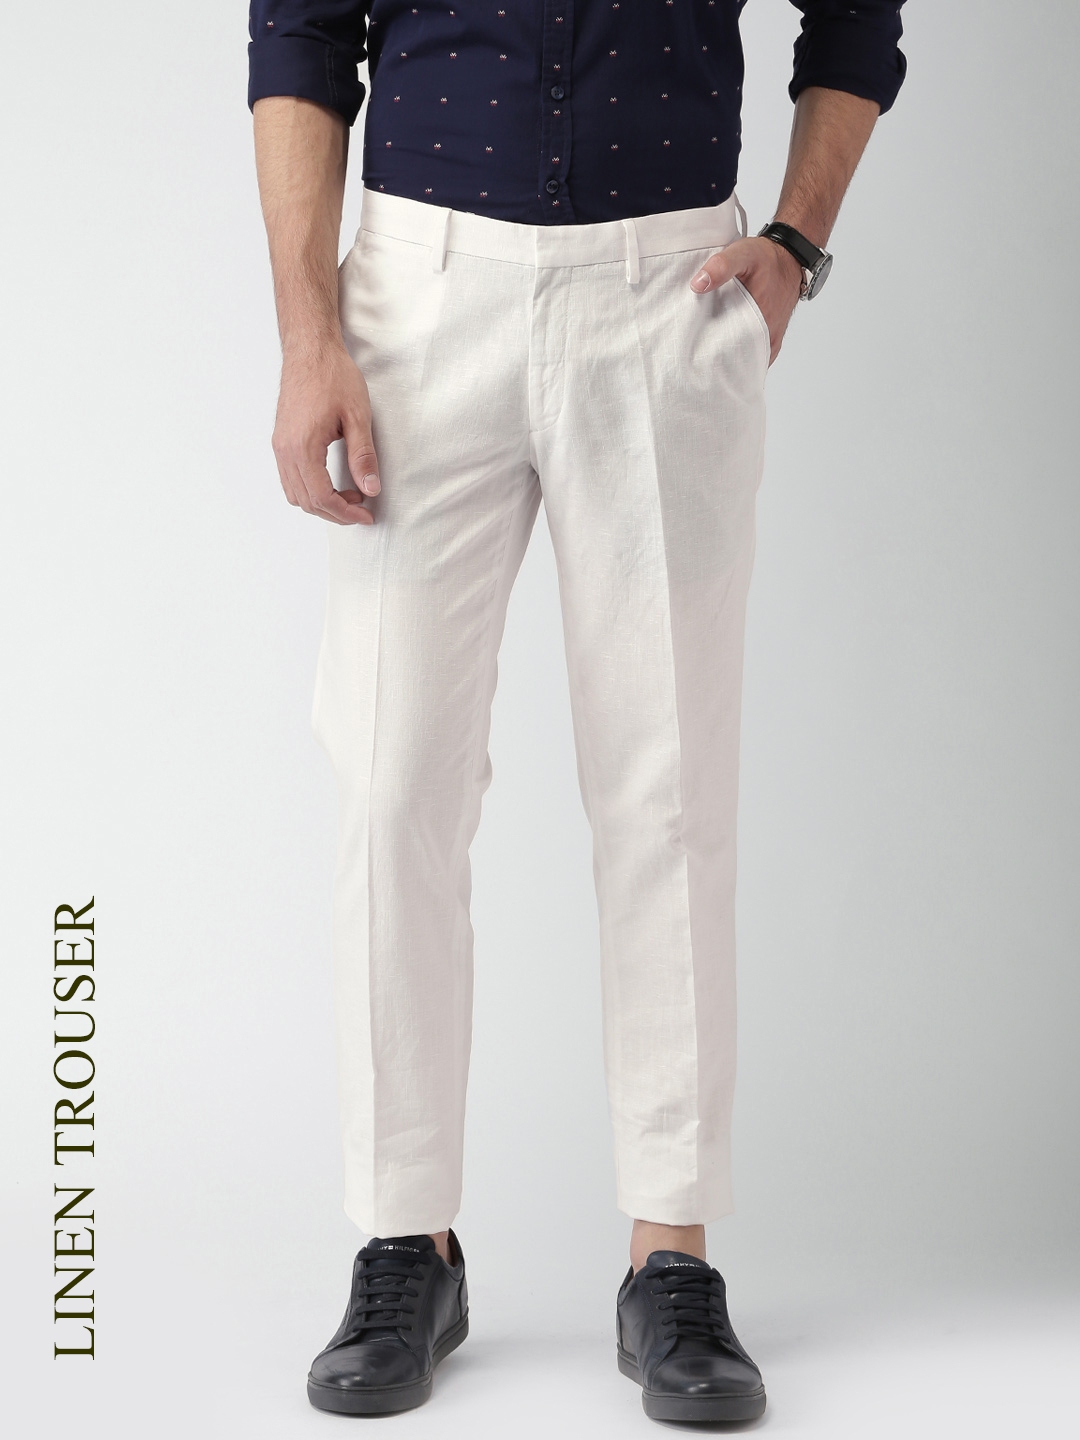 Buy Men White Slim Fit Solid Casual Trousers Online  797230  Allen Solly